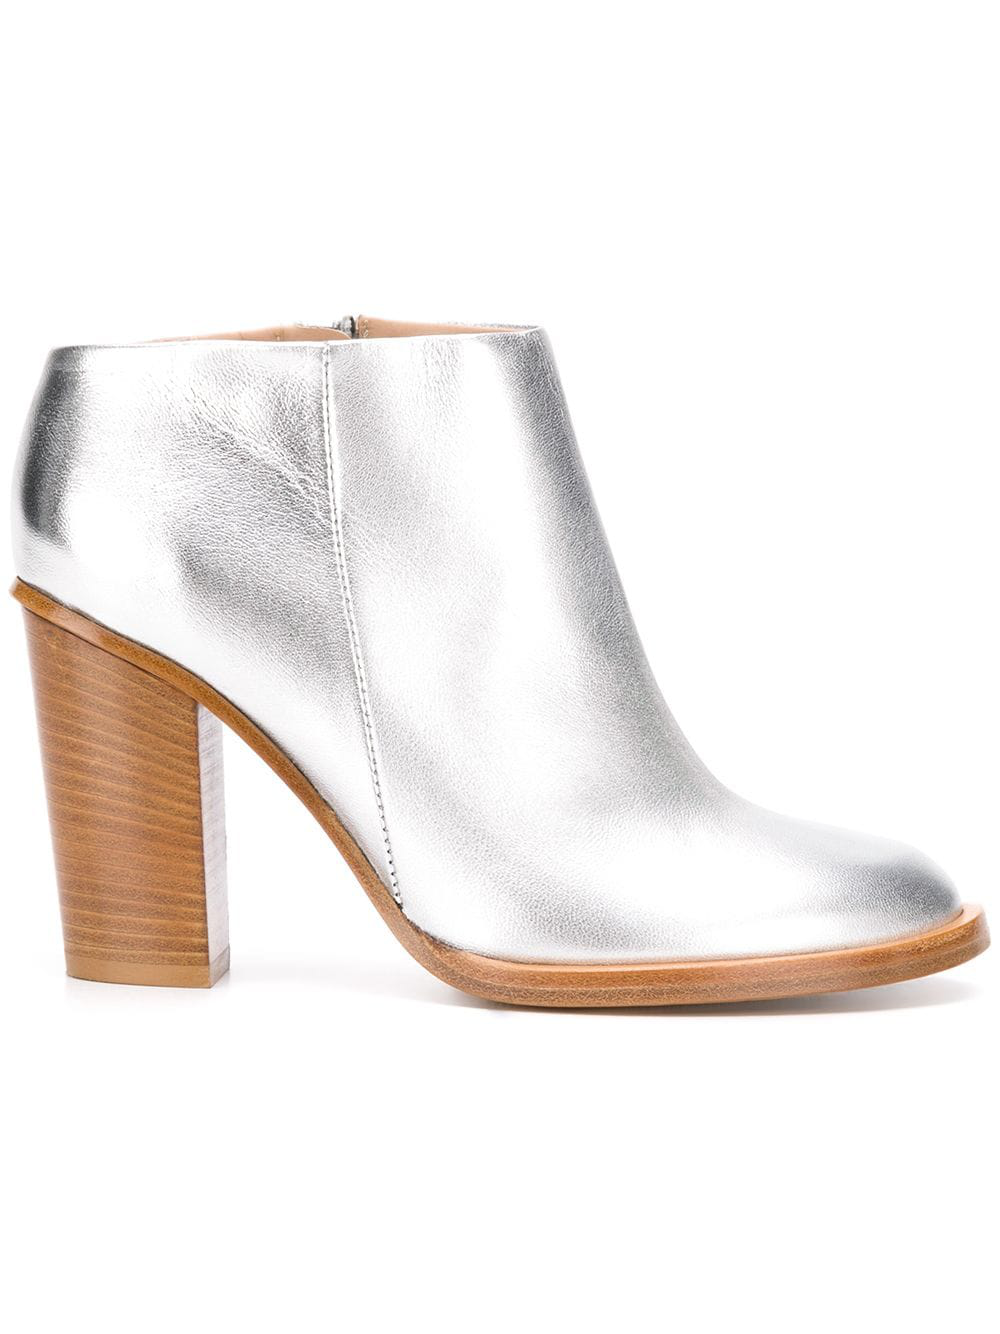 Ports 1961 Zipped Ankle Boots In Silver | ModeSens